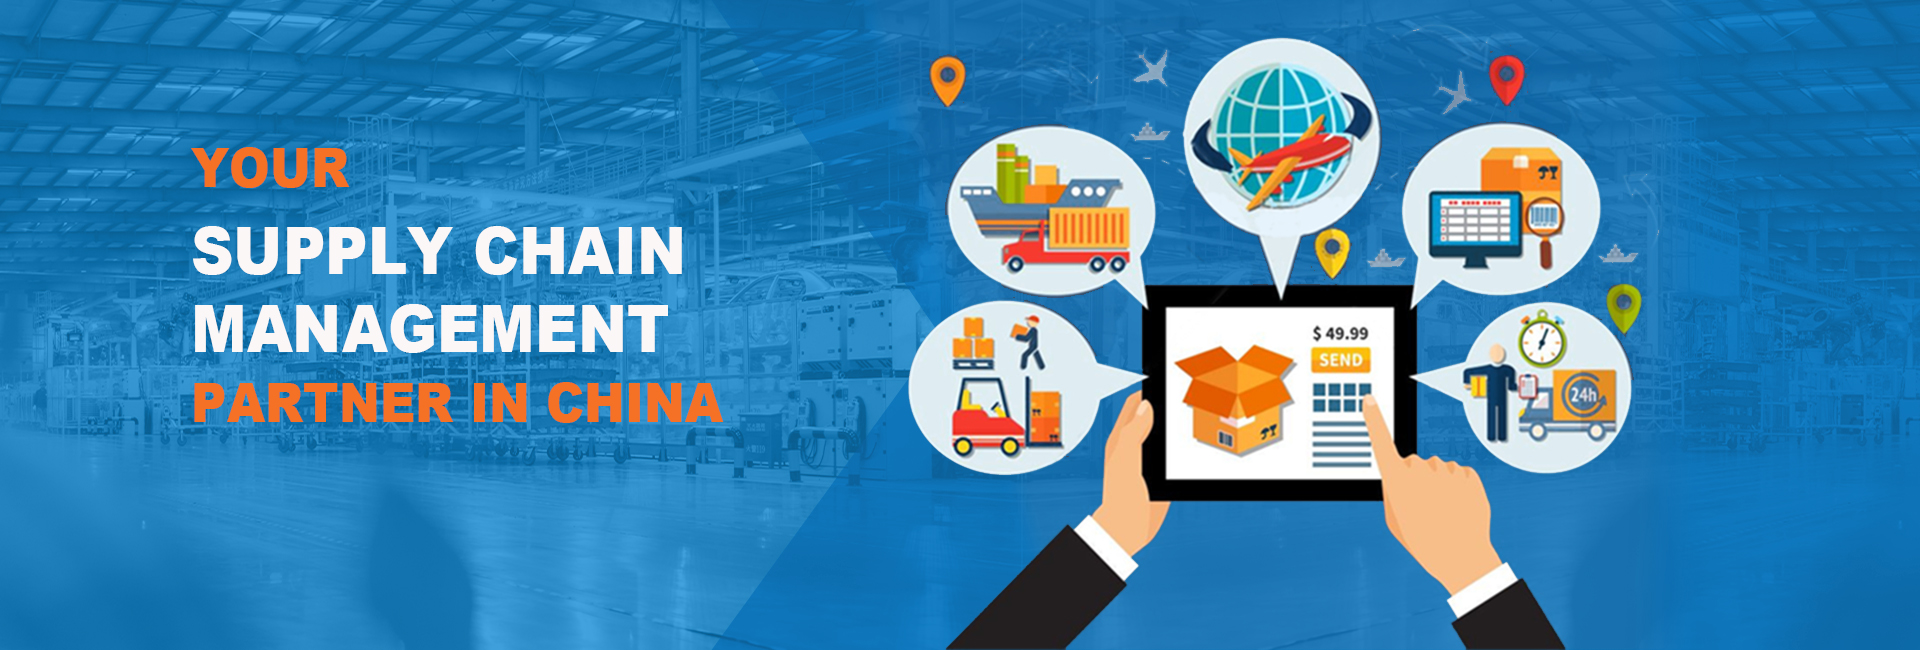 Your Supply Chain Management Partner in China